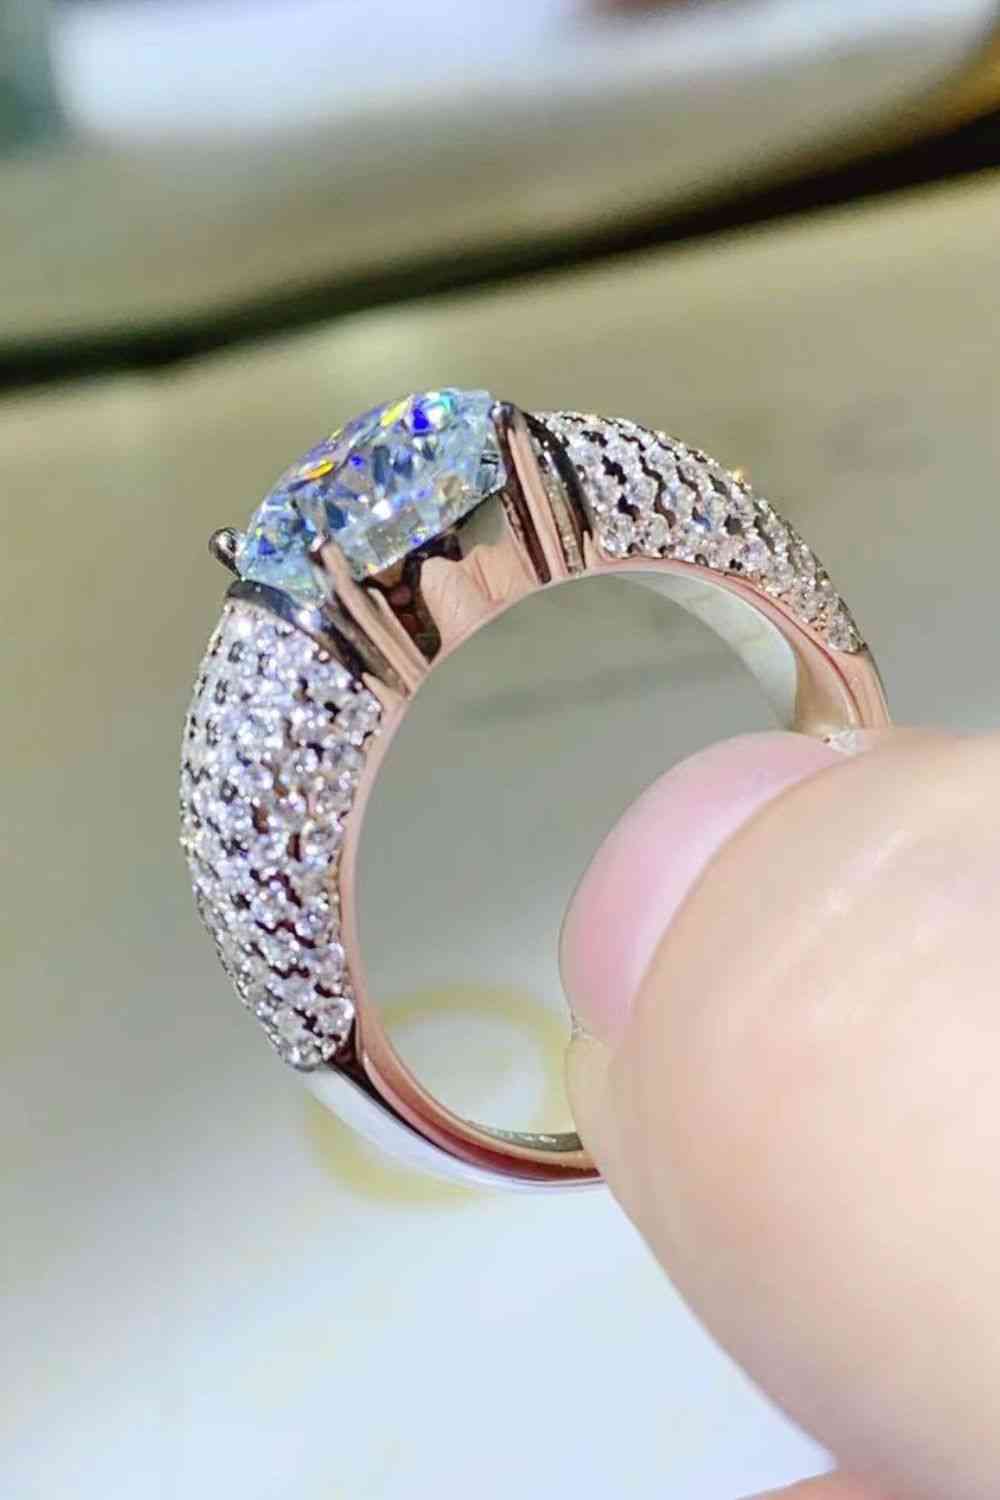 a person is holding a ring with diamonds on it